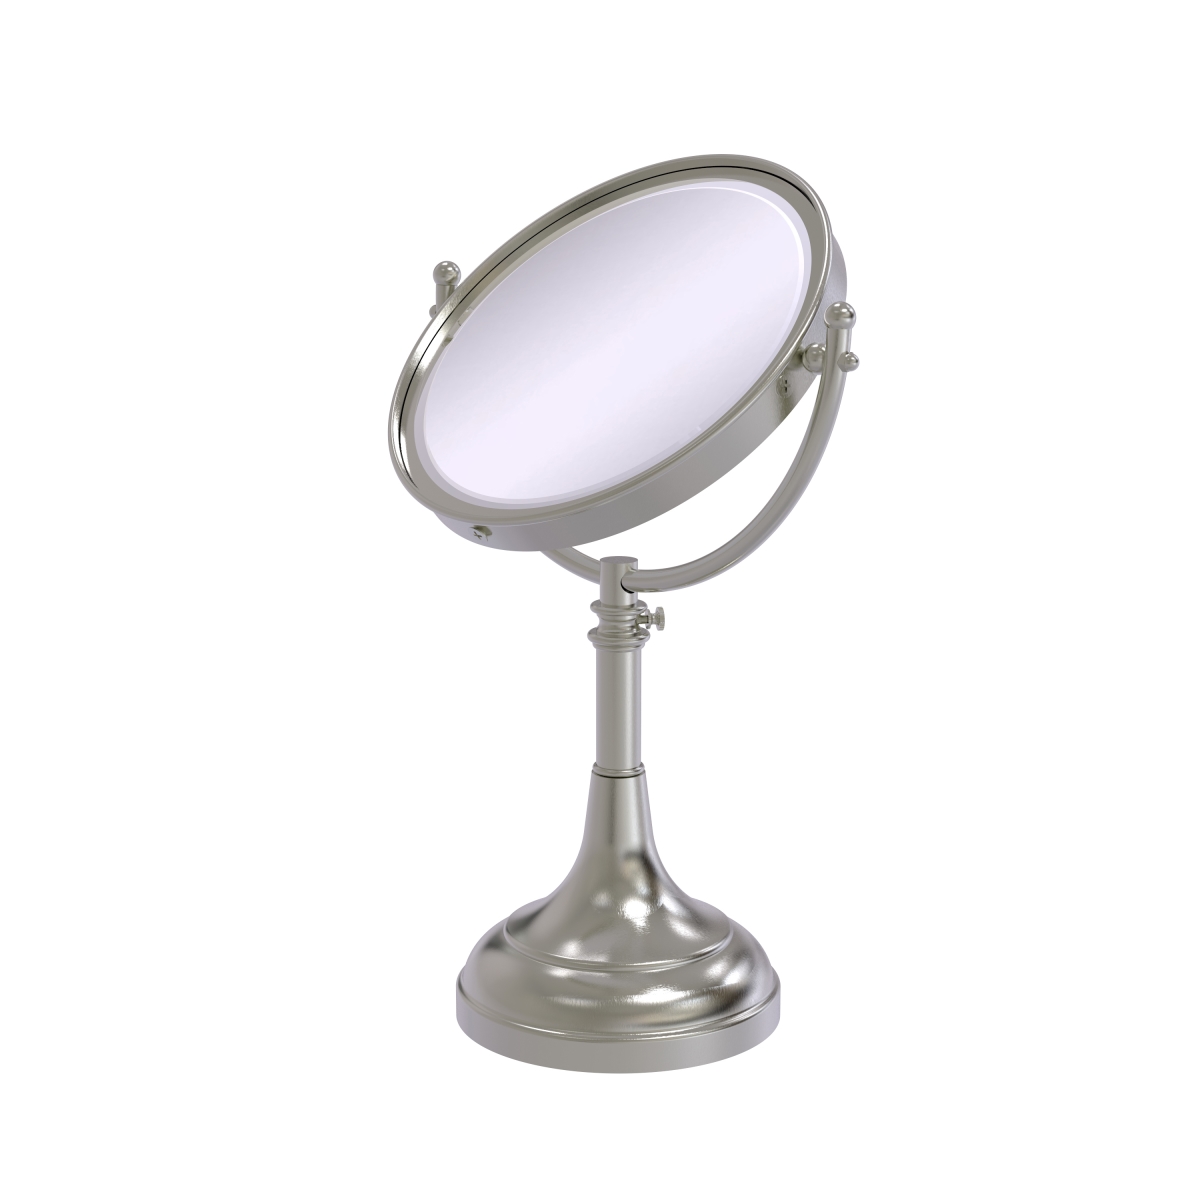 Picture of Allied Brass DM-1-3X-SN 8 in. Height Adjustable Vanity Top Make-Up Mirror 3X Magnification, Satin Nickel